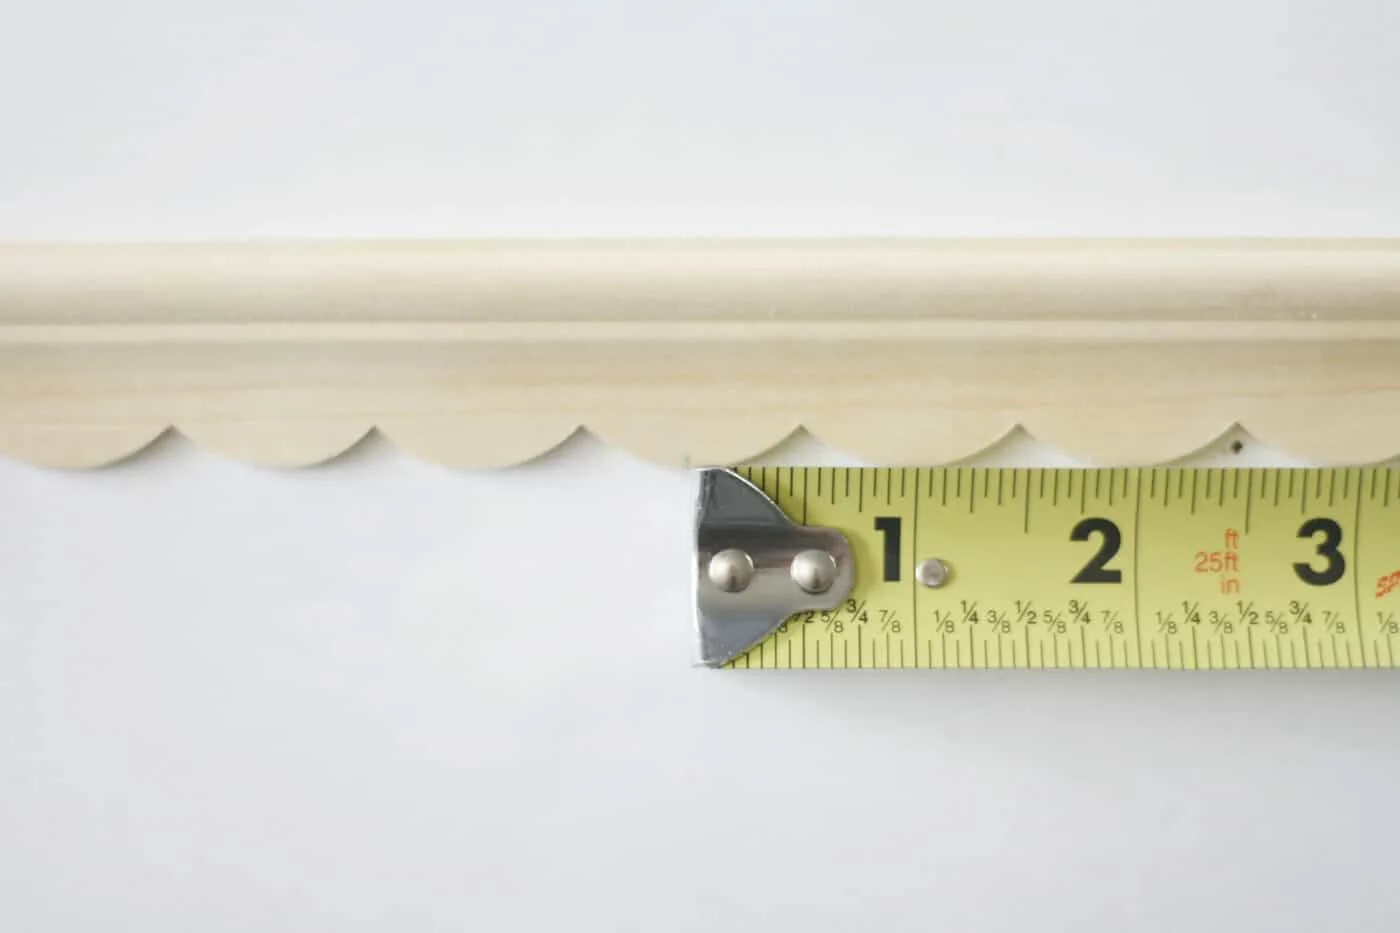 Measuring tape next to a piece of wood trim